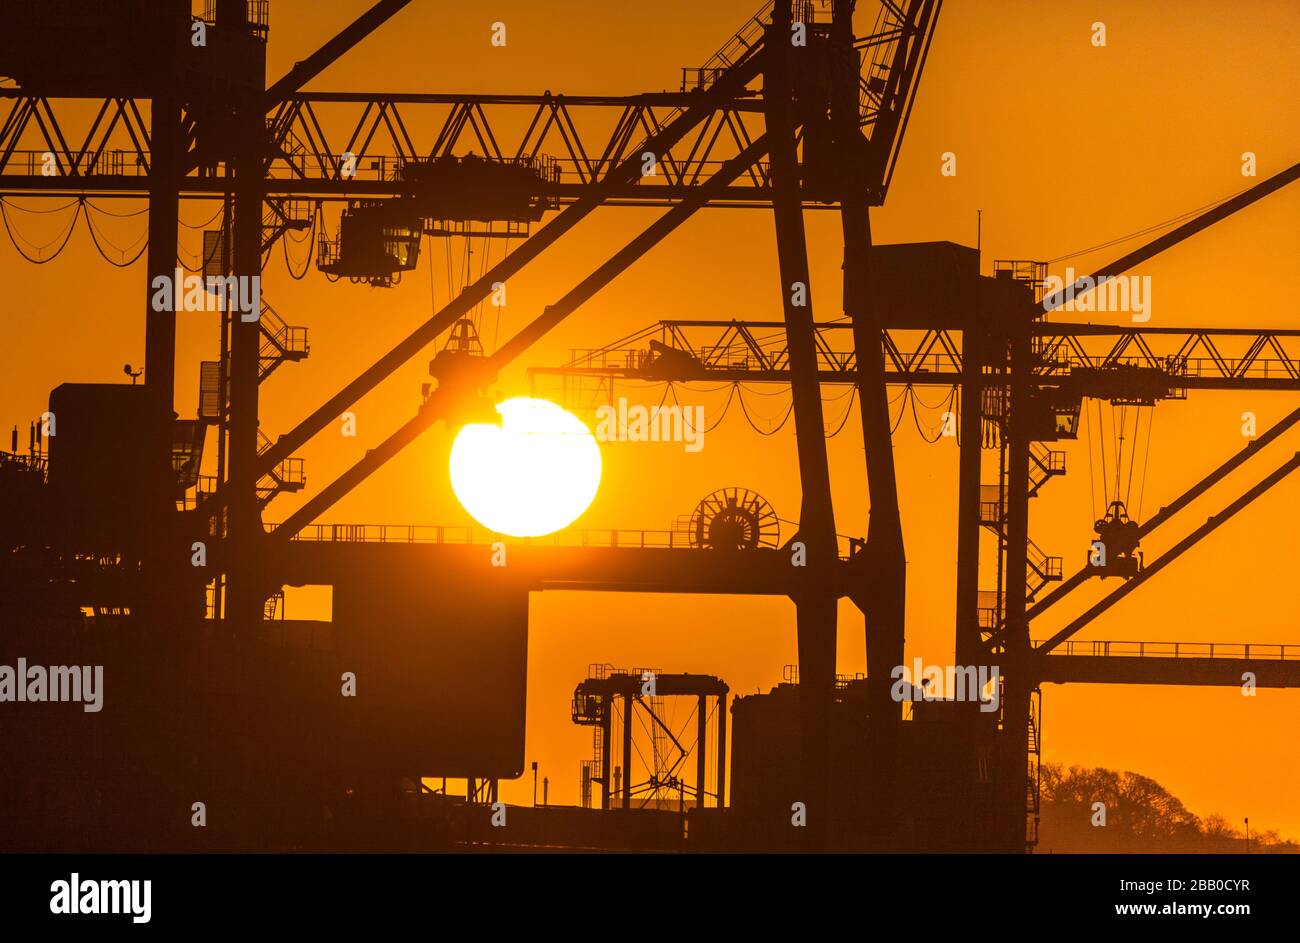 Tivoli, Cork, Ireland. 30th March, 2020. In critical times during the Covid-19 emergency the Irish economy is dependent on imports which are a lifeline to the country. Keeping this vital supply line open is the Port of Cork where the majority of the countries imports arrive.   Picture shows Gantry Cranes silhouetted by the rising sun at Tivoli Docks in Cork City, Ireland.    - Credit; David Creedon / Alamy Live News Stock Photo